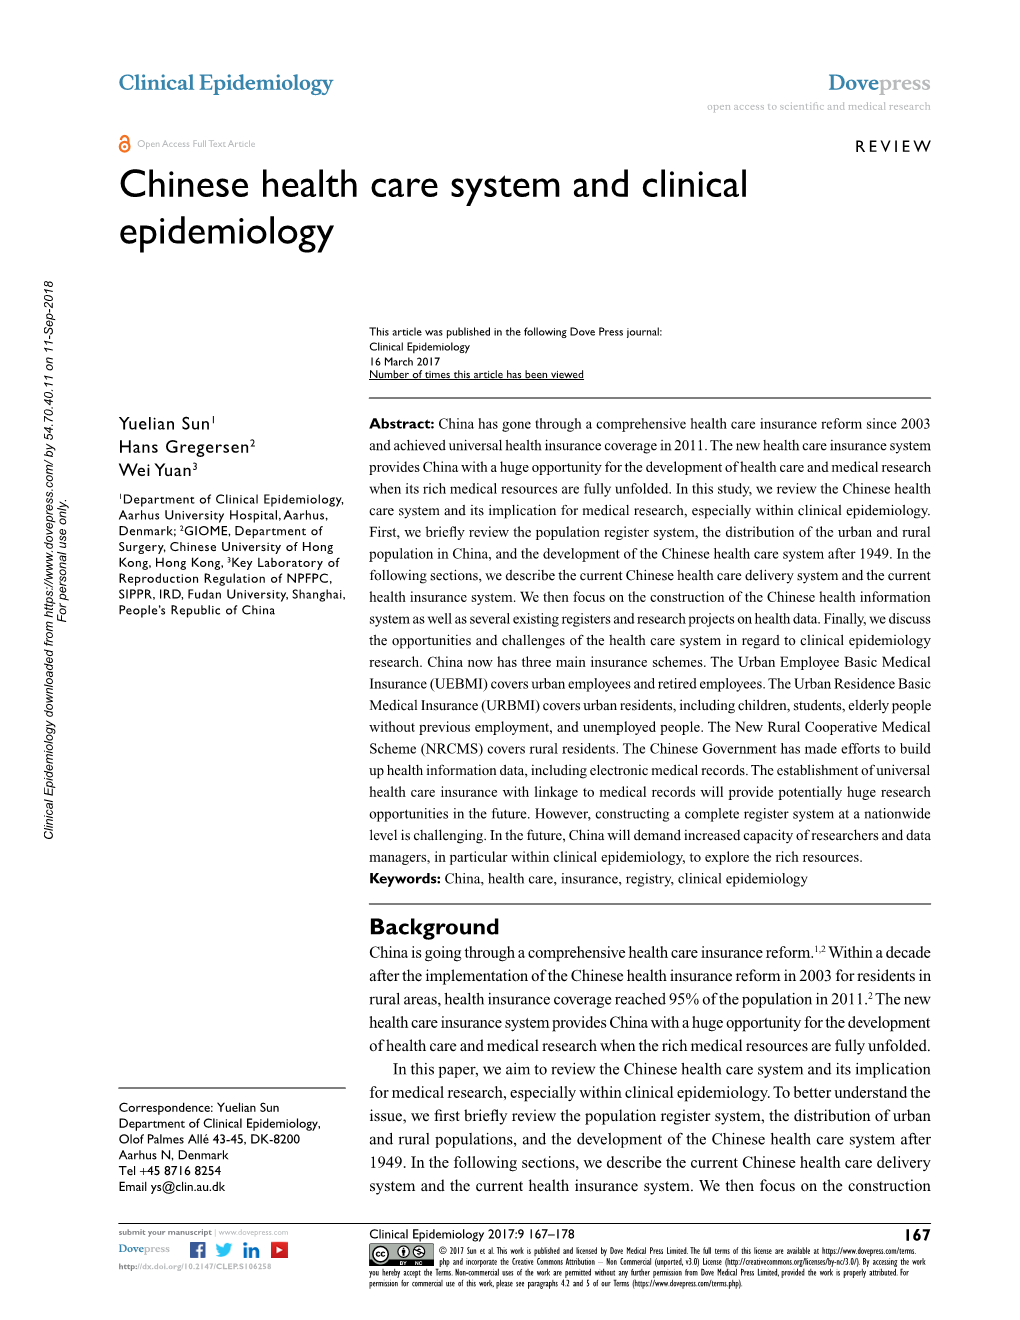 Chinese Health Care System and Clinical Epidemiology